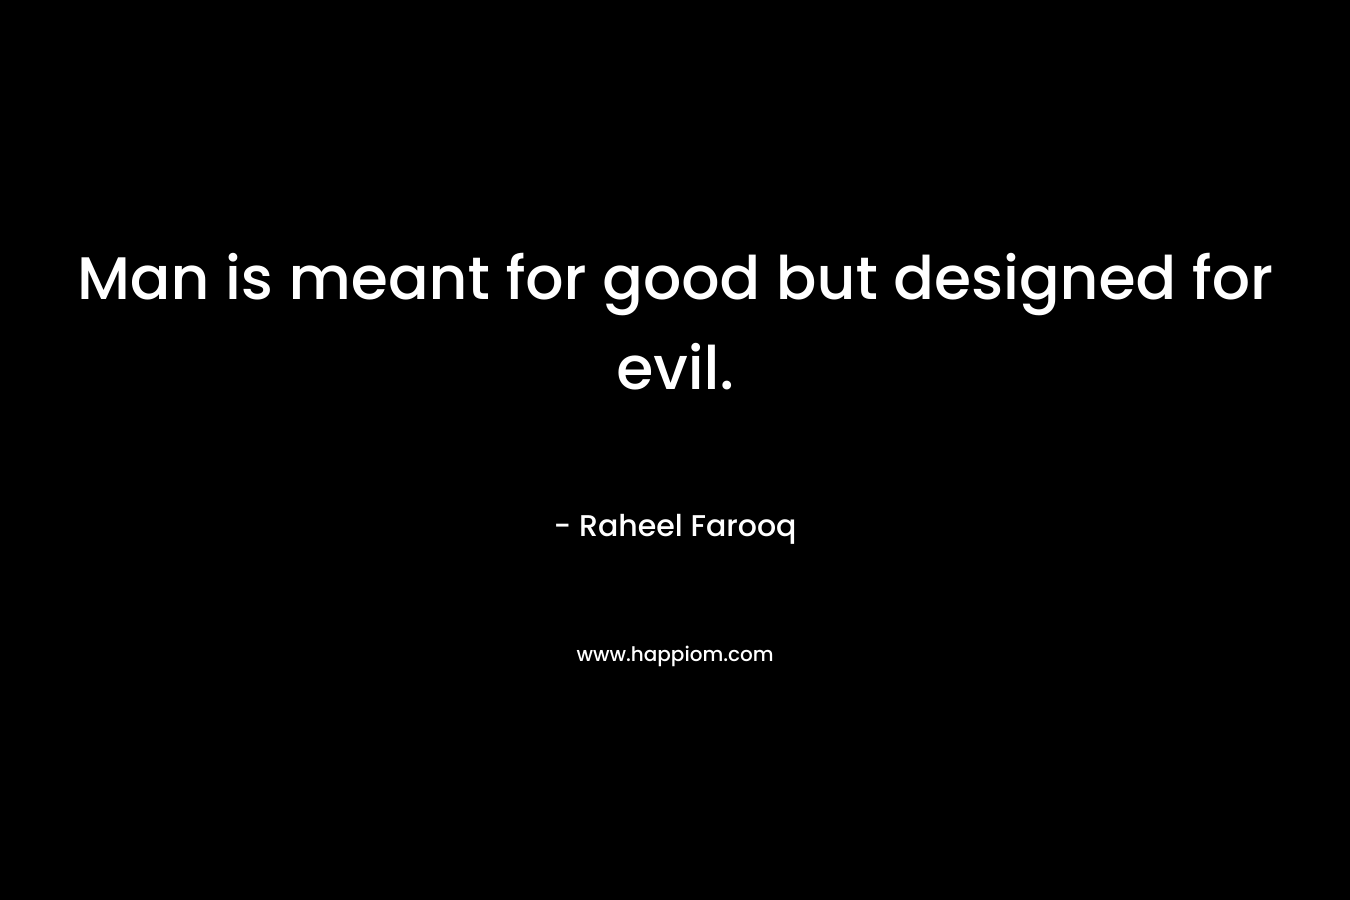 Man is meant for good but designed for evil.